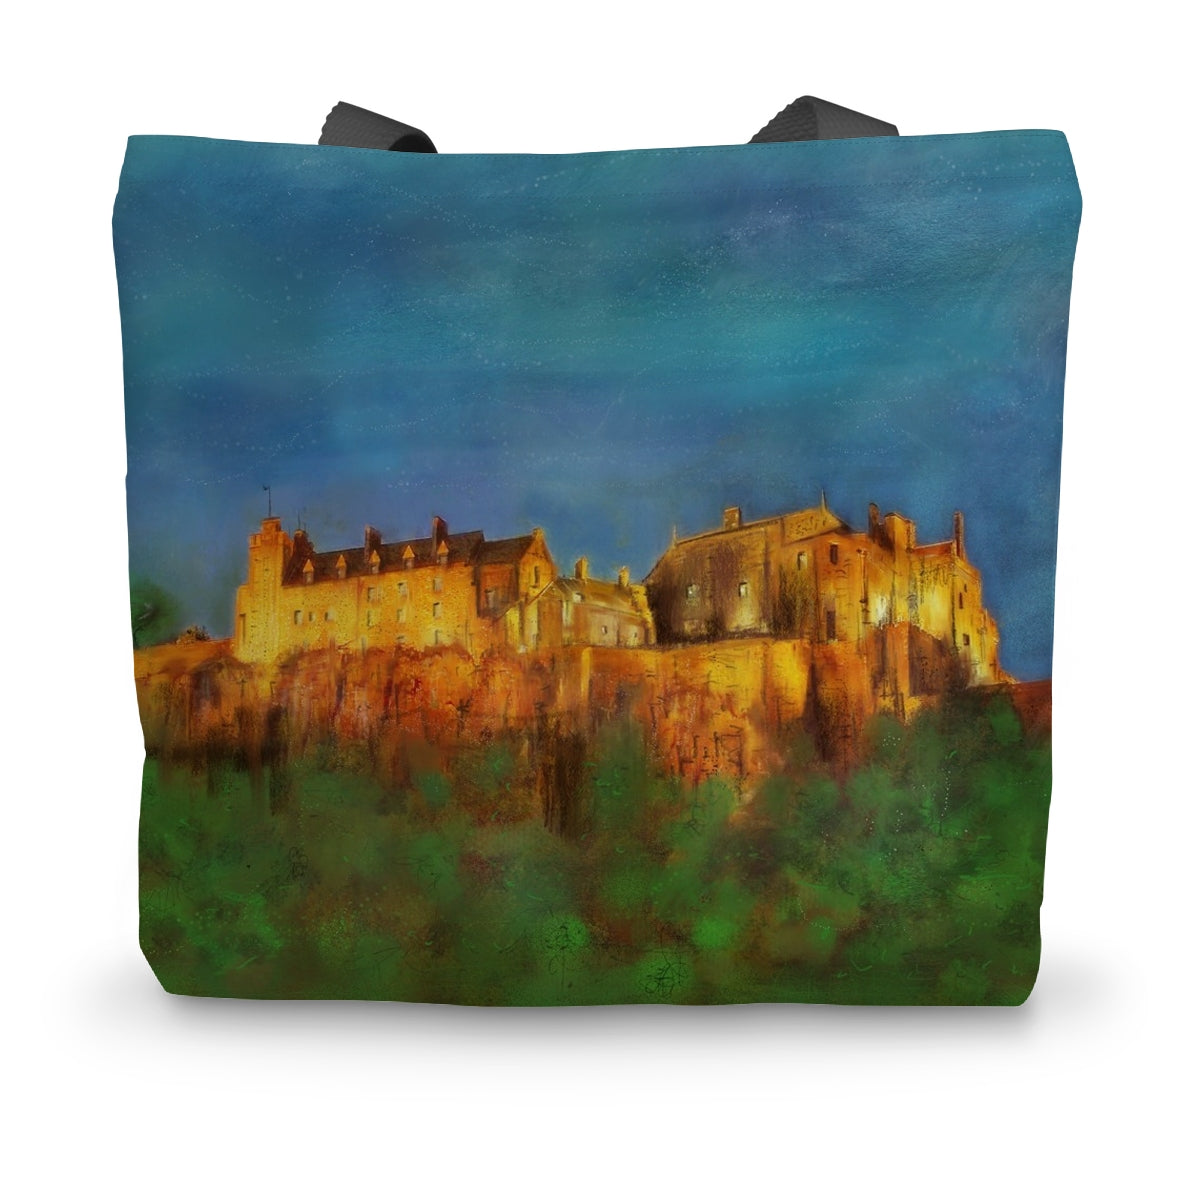 Stirling Castle Art Gifts Canvas Tote Bag-Bags-Historic & Iconic Scotland Art Gallery-14"x18.5"-Paintings, Prints, Homeware, Art Gifts From Scotland By Scottish Artist Kevin Hunter